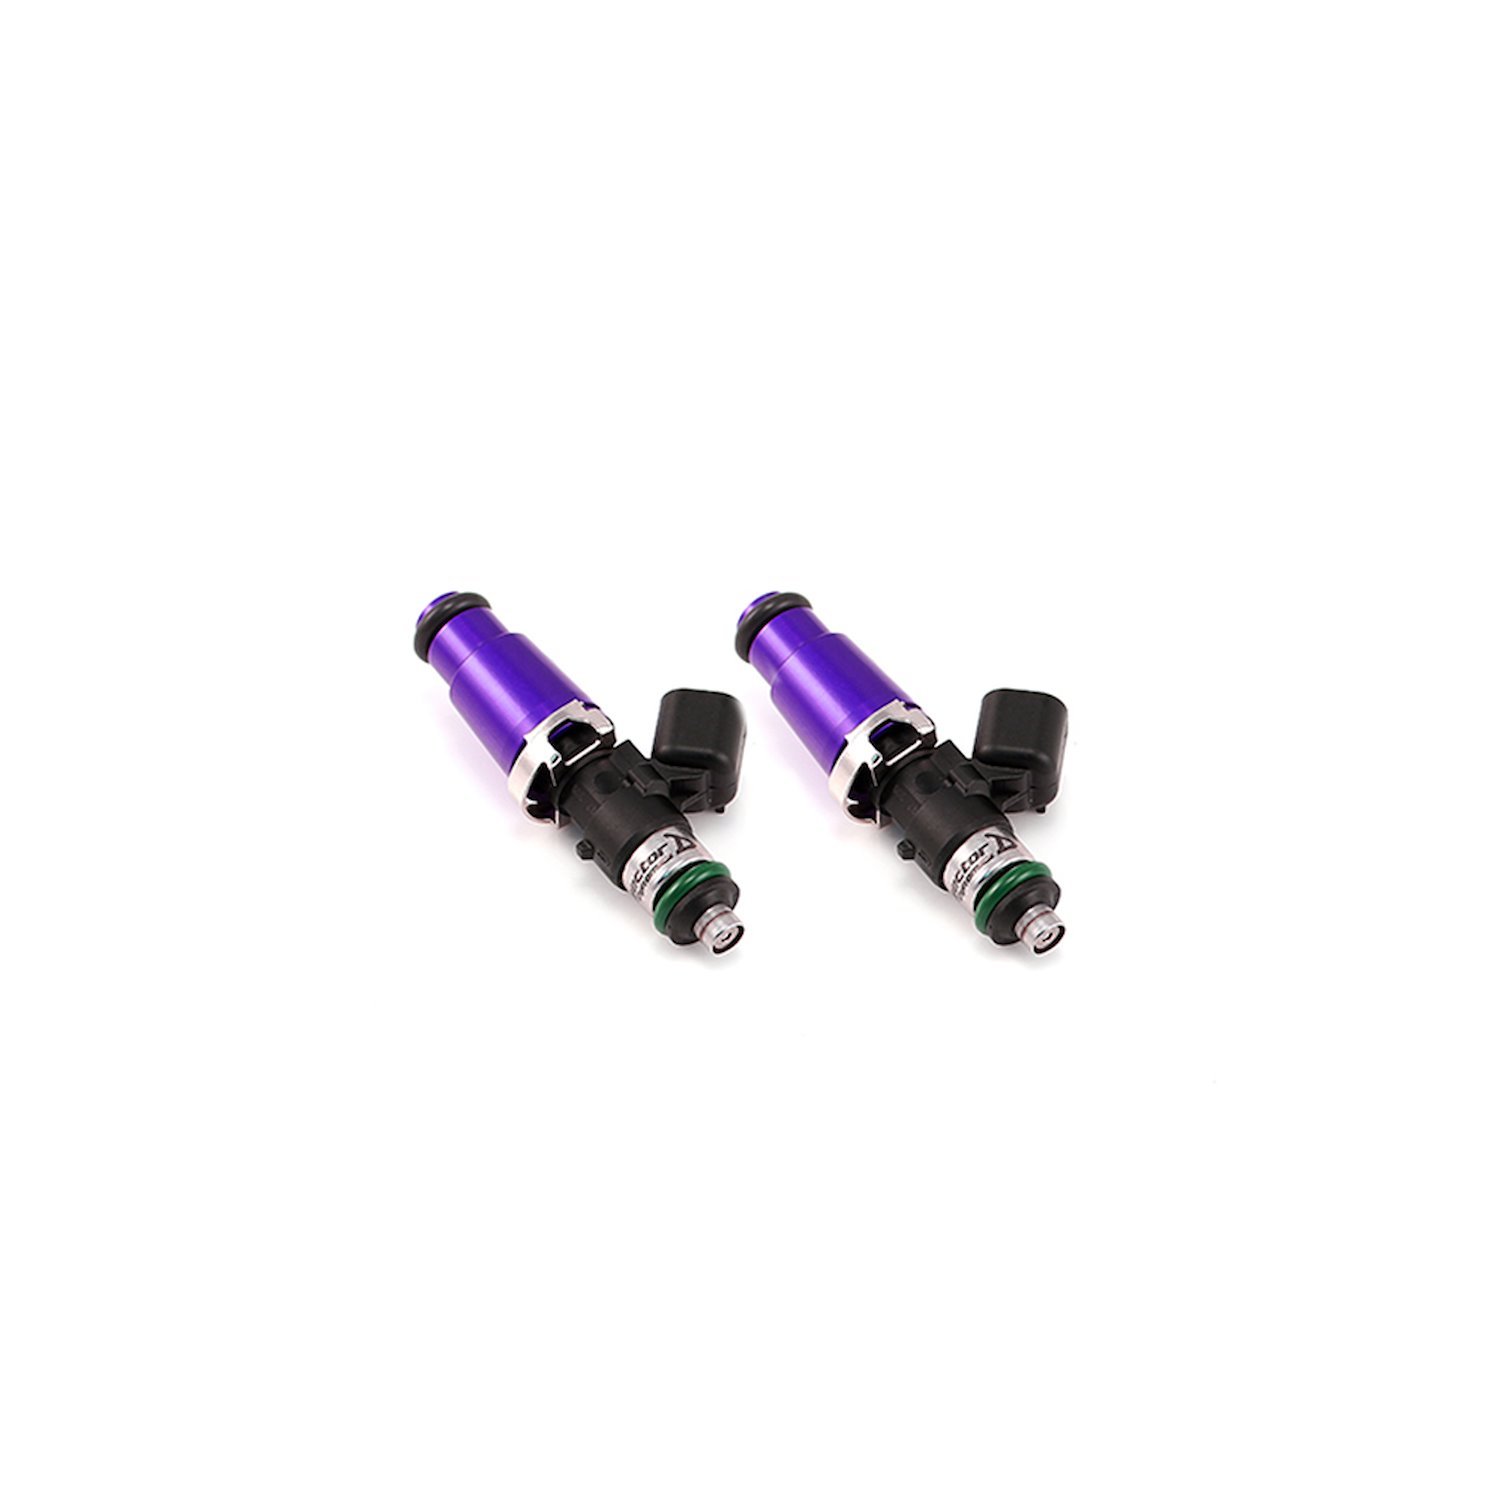 1050.60.14.14.2 1050cc Fuel Injector Set, 60 mm Length, 14 mm (Purple) Top, 14 mm Lower O-Ring